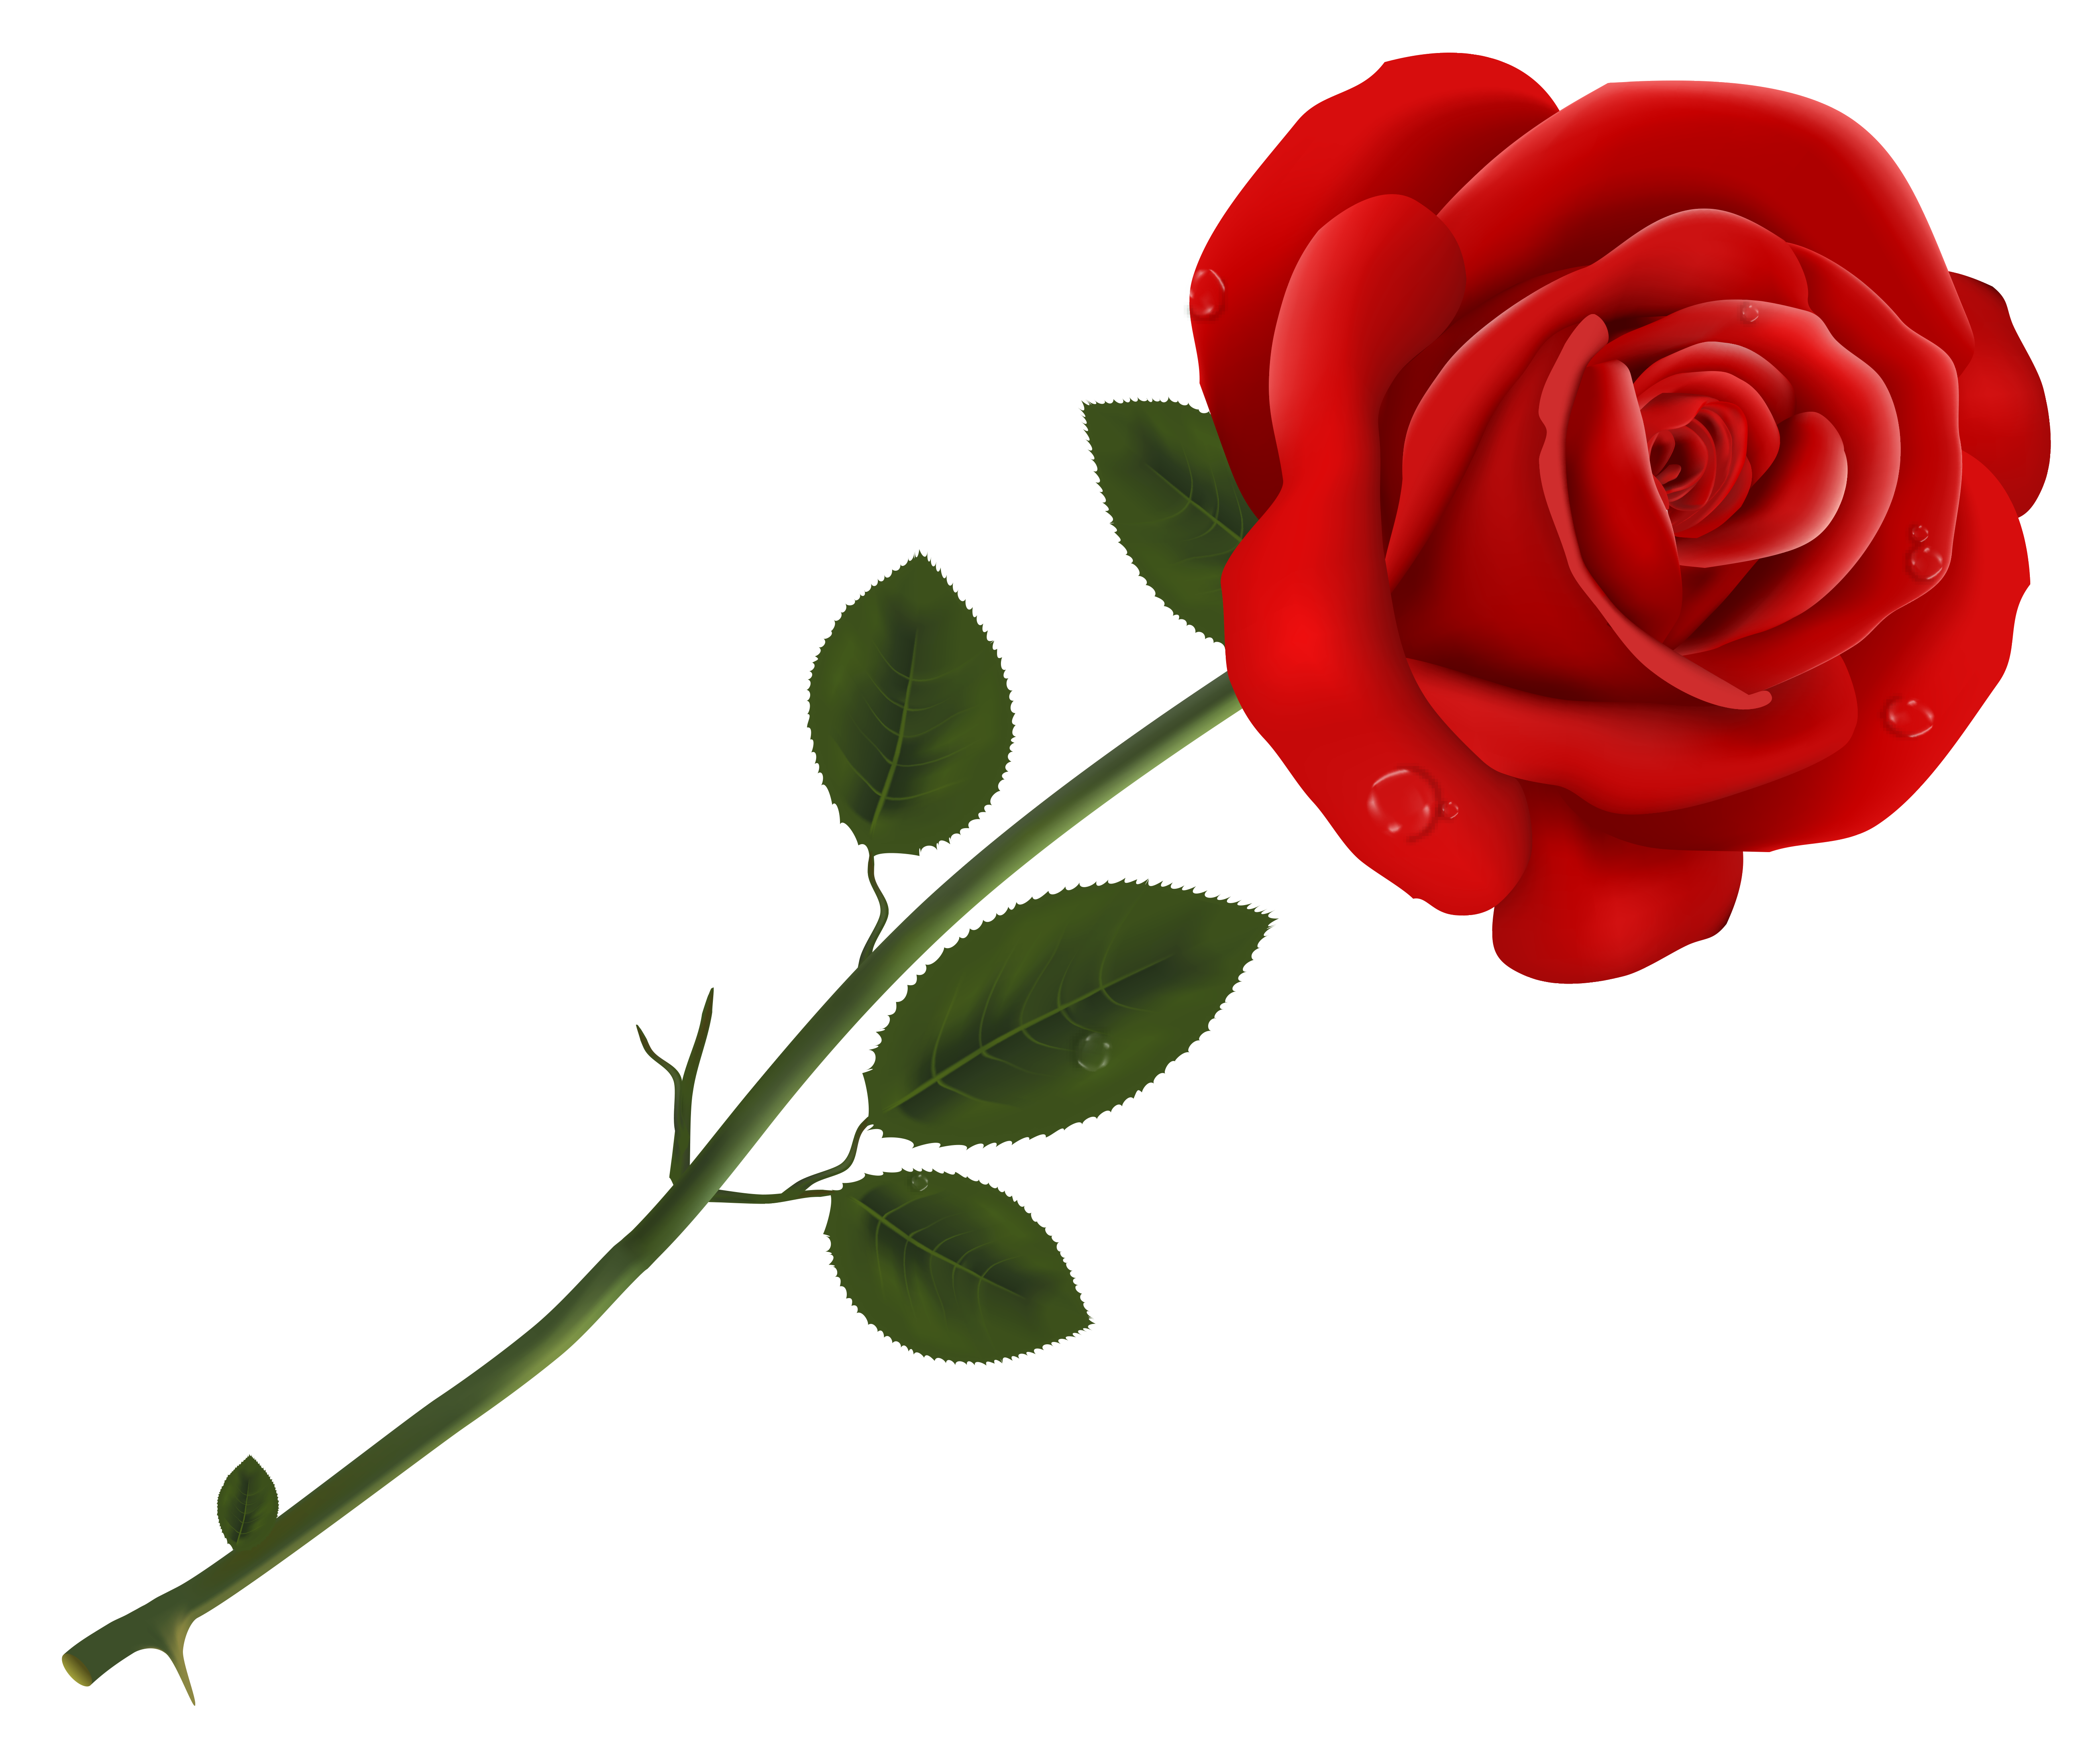 0 Result Images of Imagenes De Rosas Rojas Png - PNG Image Collection